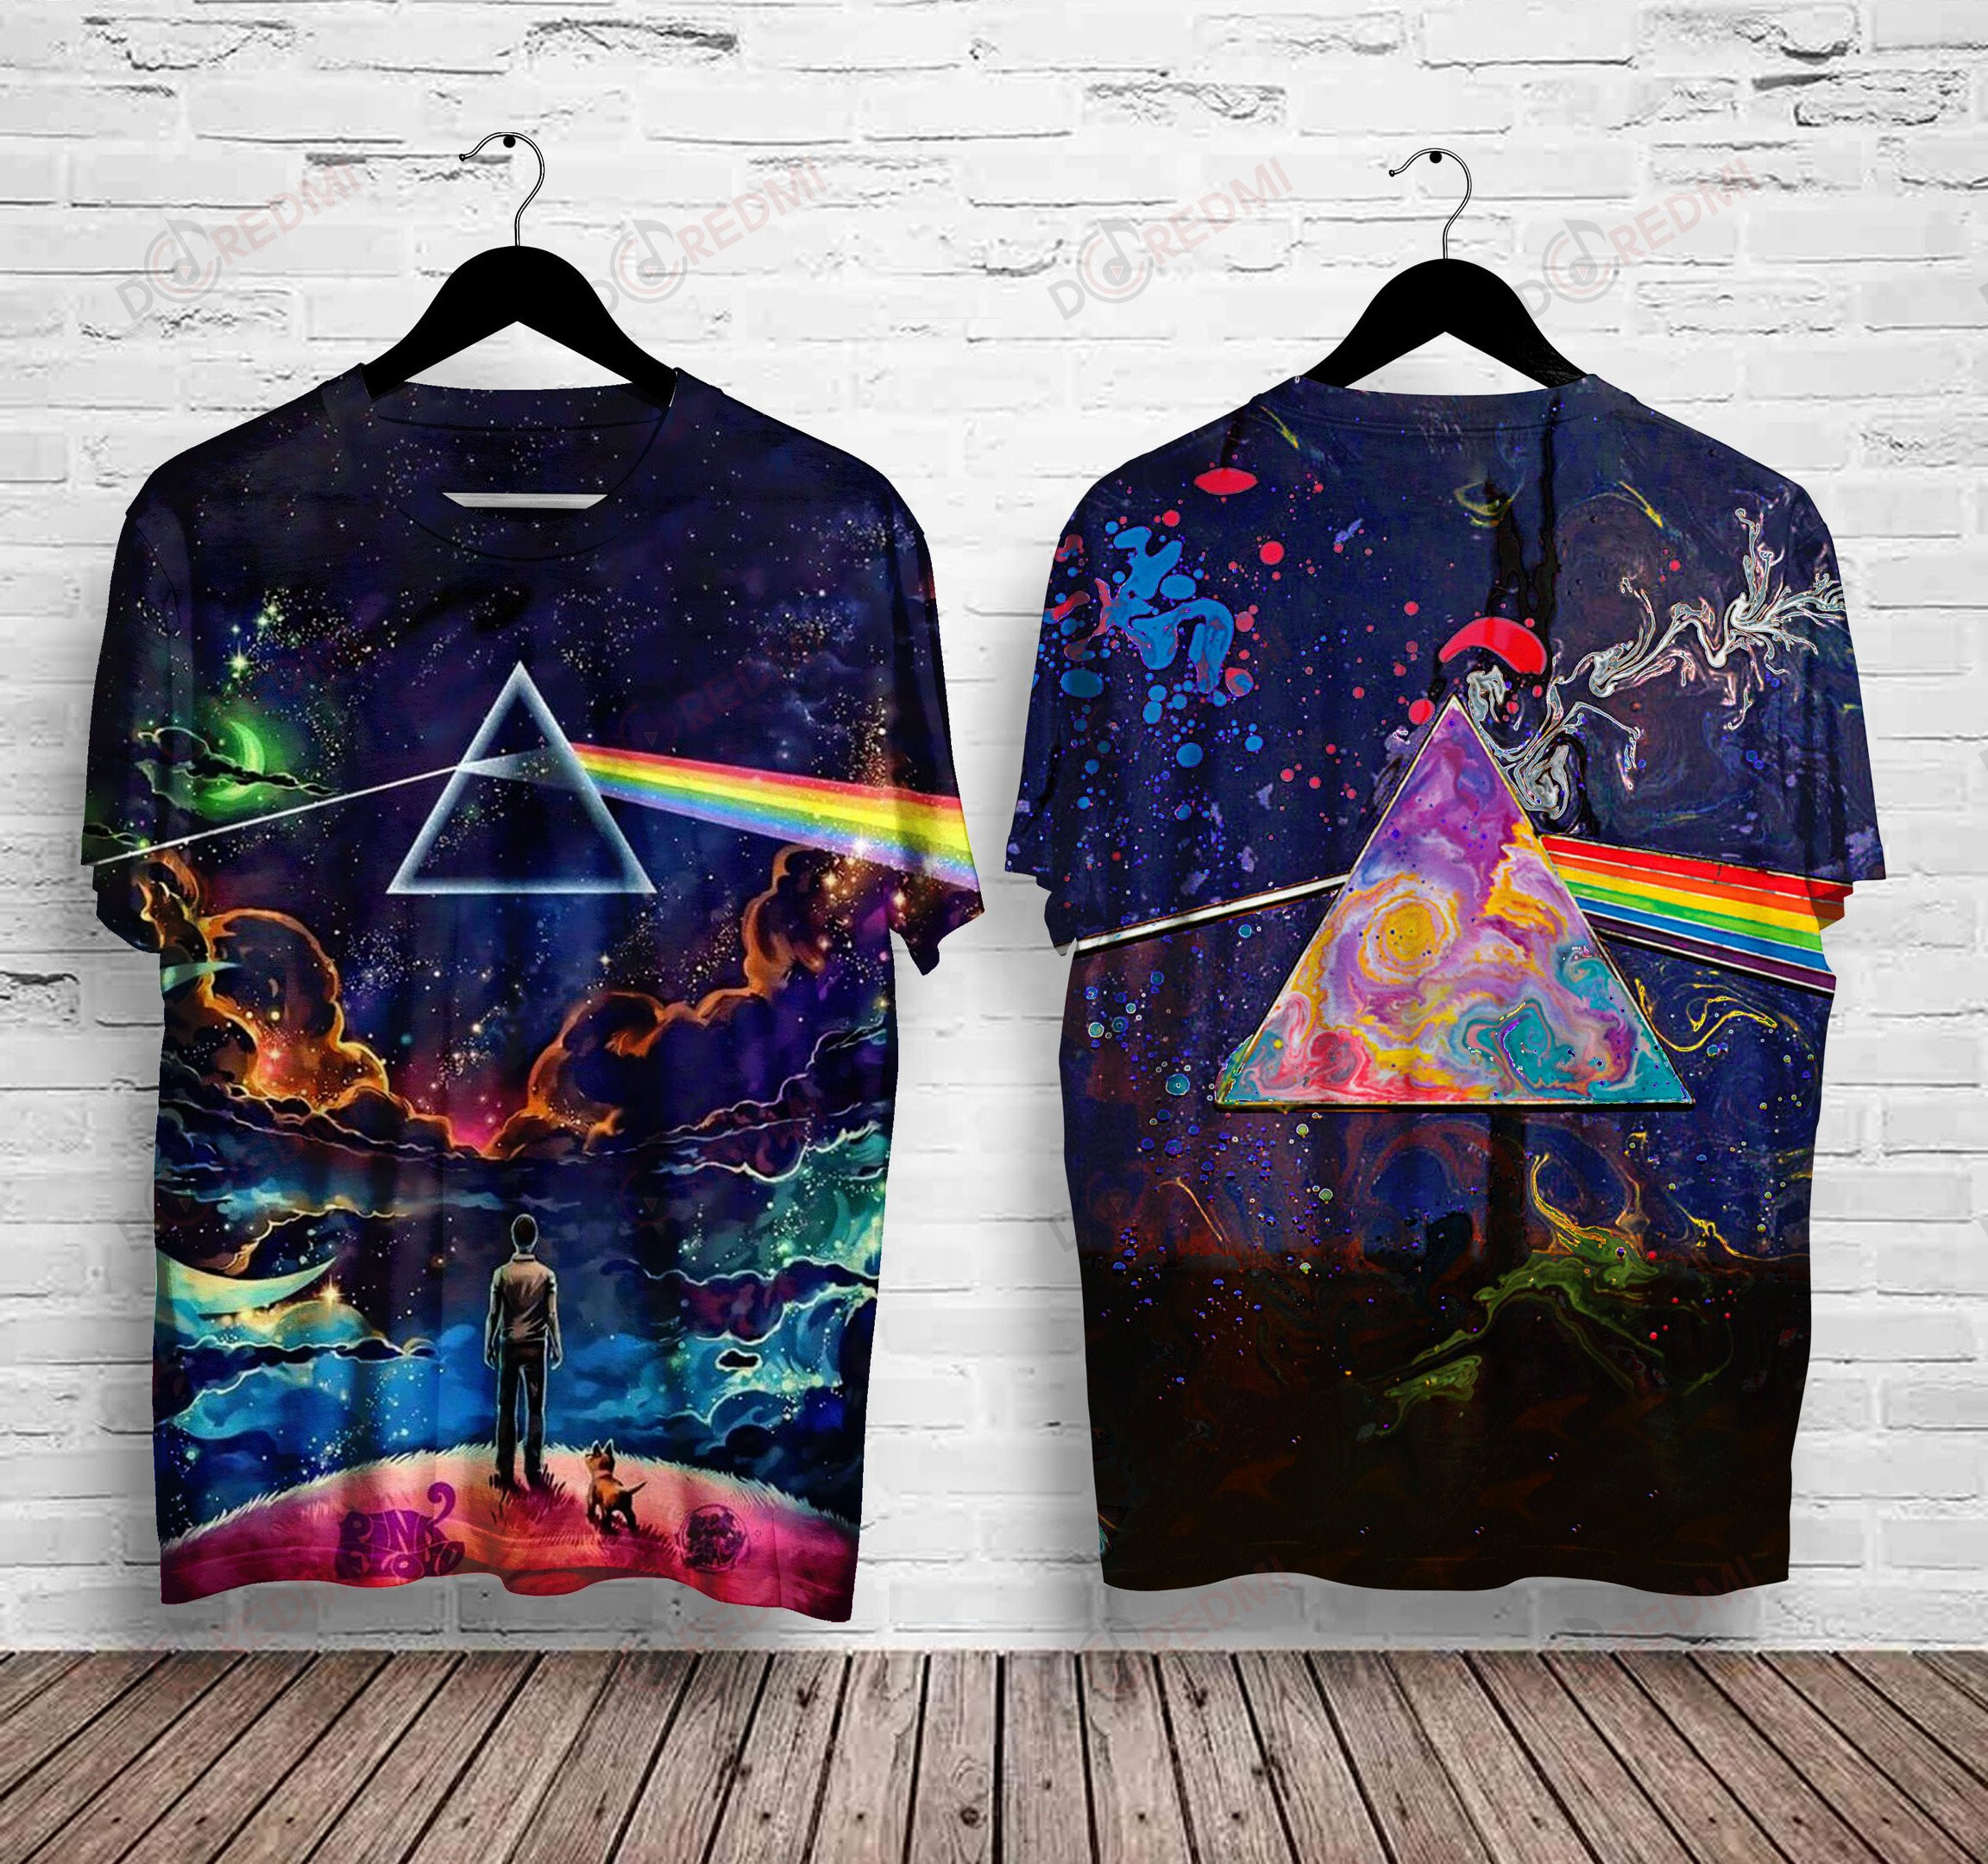 Here are some of the best 3d shirt available today 433